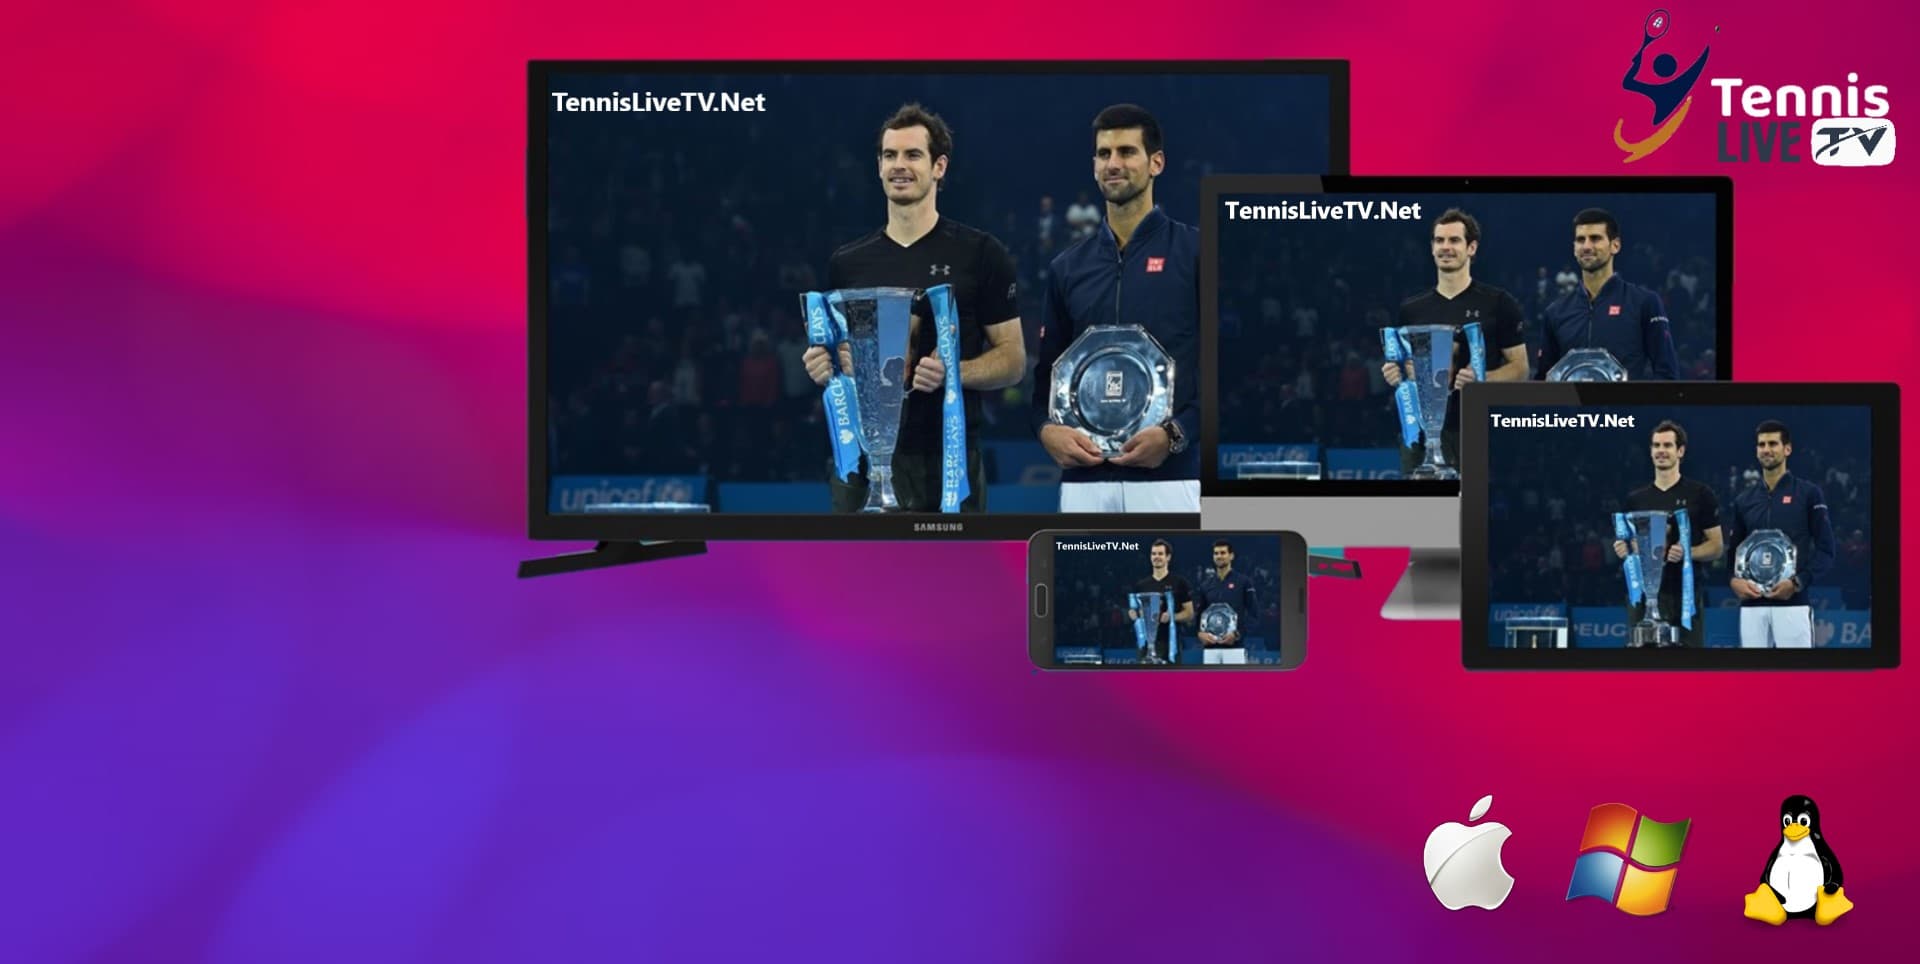 How to watch live matches of tennis for free - Quora